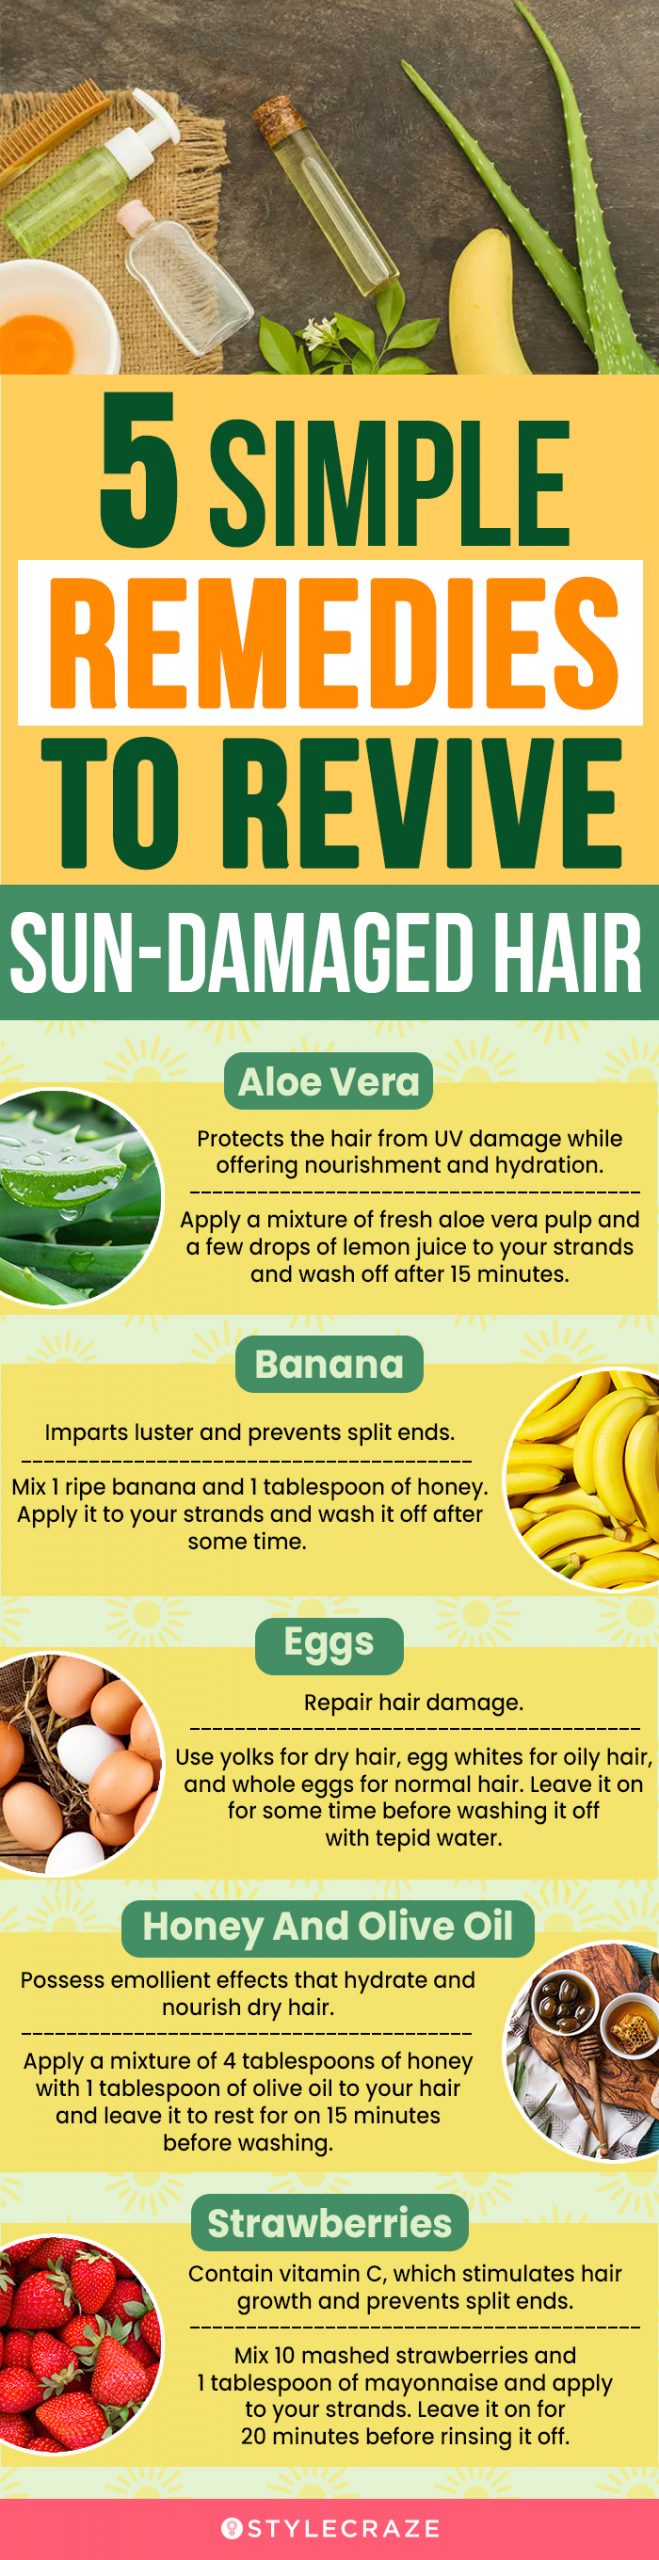 5 simple remedies to repair sun damage to hair (infographic)